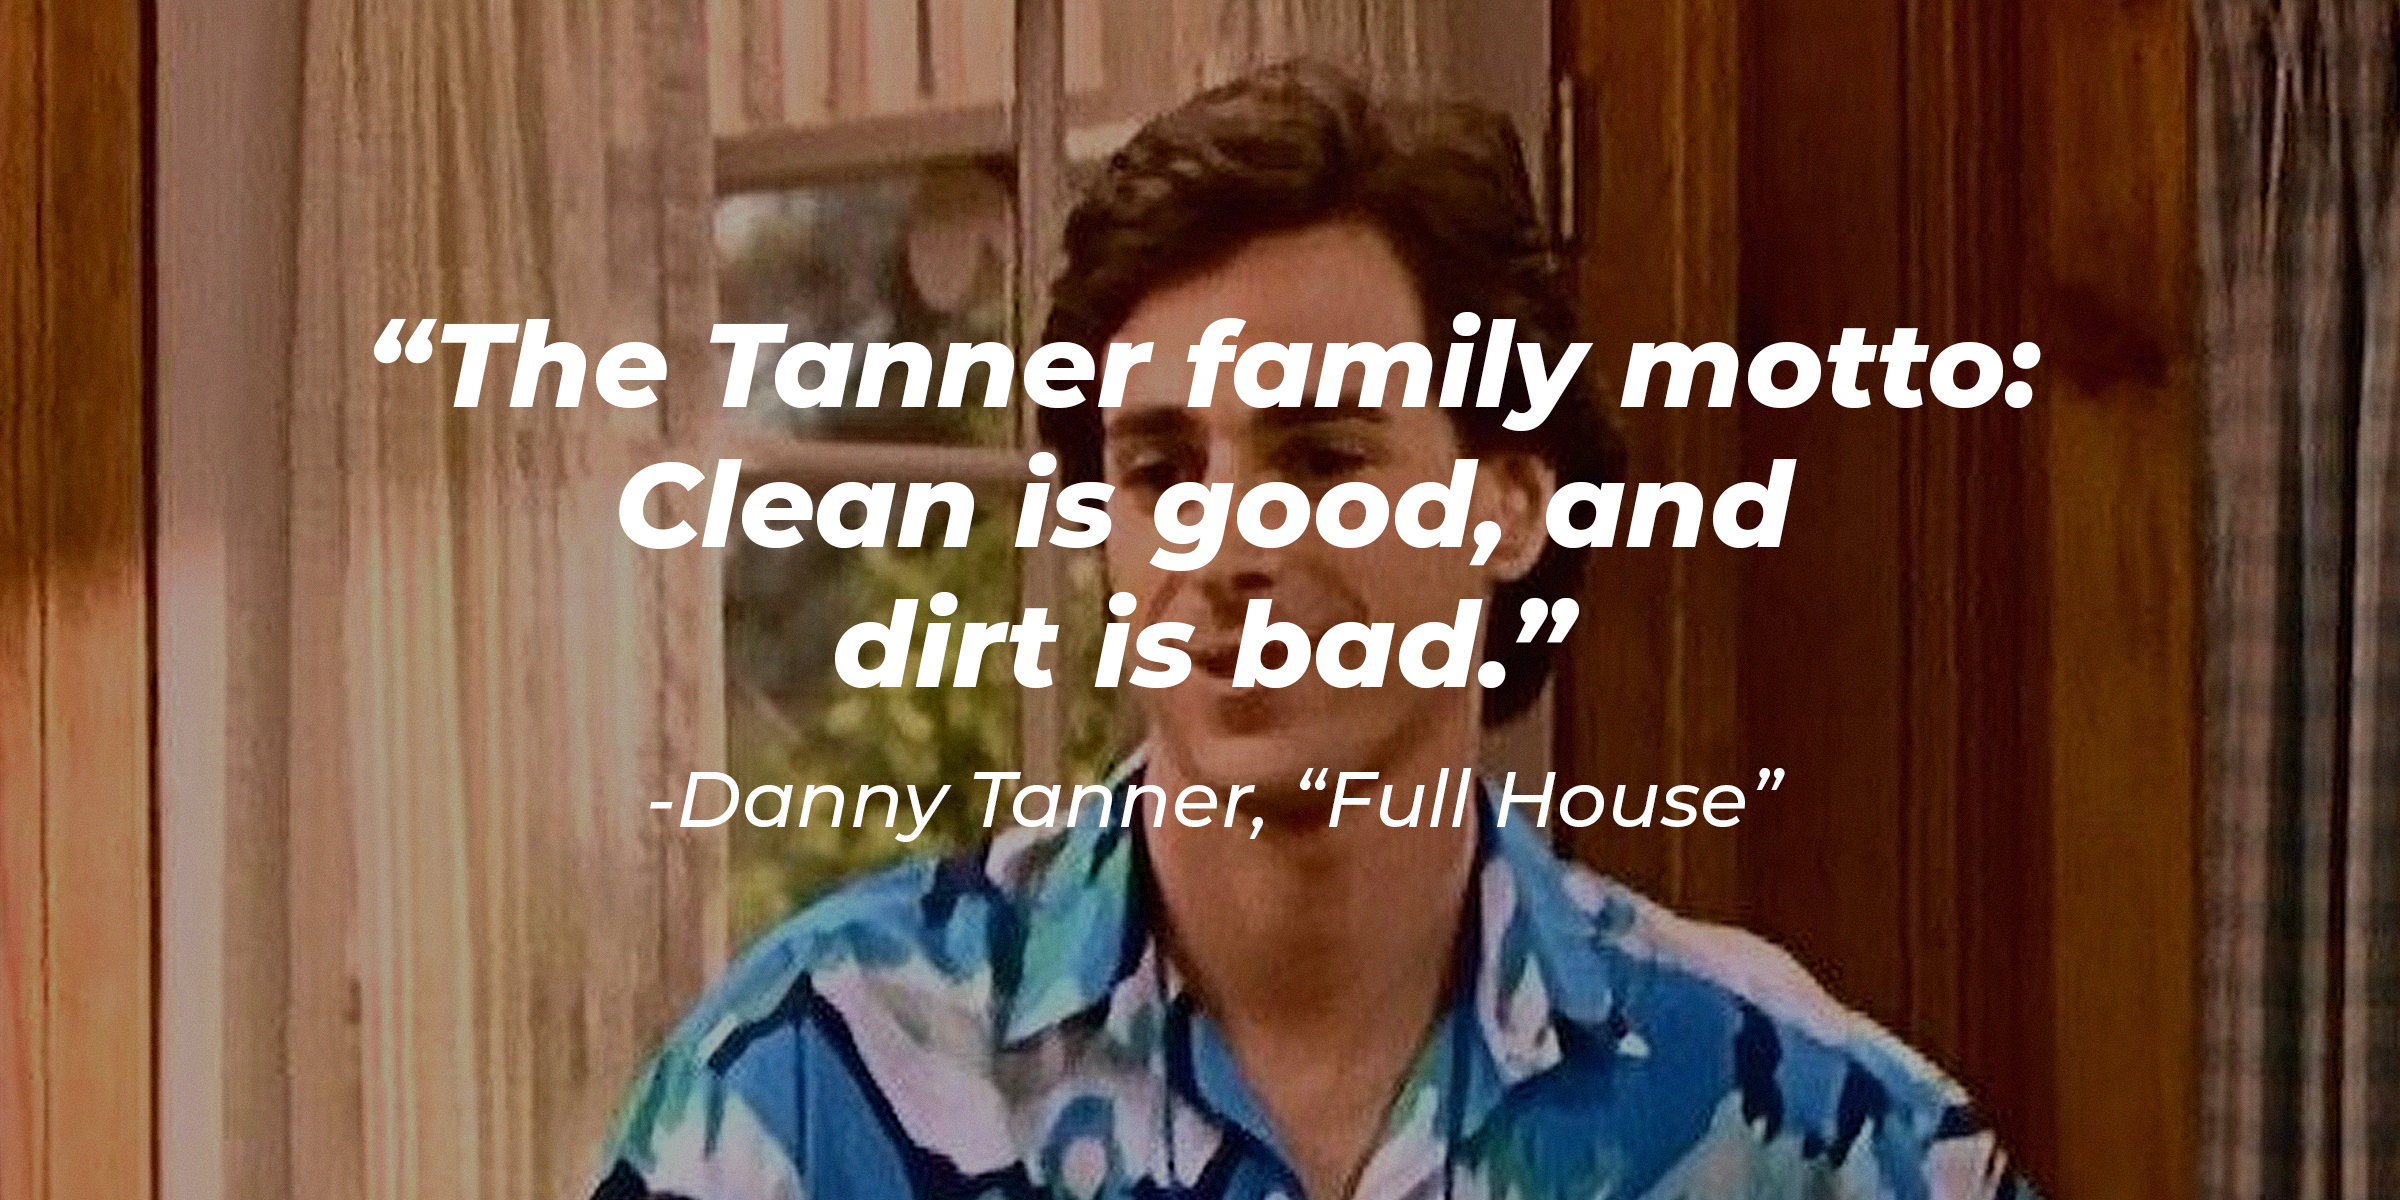 Danny Tanner with his quote: "The Tanner family motto: Clean is good, and dirt is bad." | Source: facebook.com/FullHouseTVshow